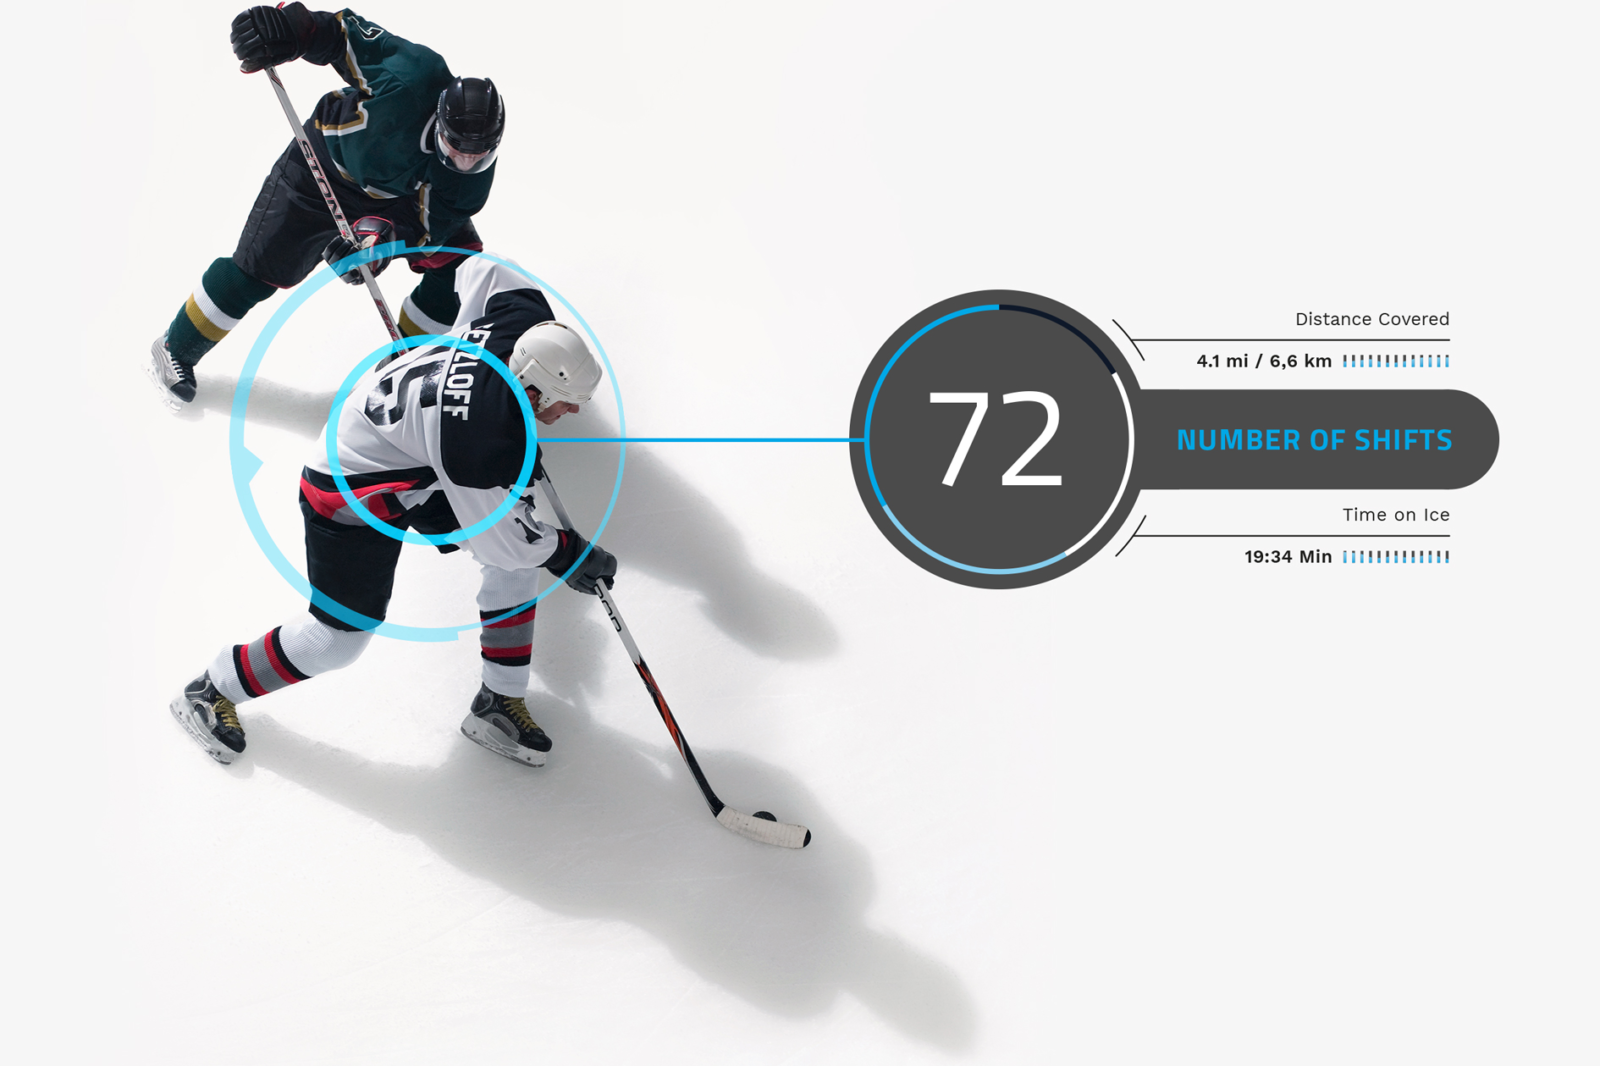 Hockey analytics are collected during practices and games to provide coaches with detailed information on their skaters.